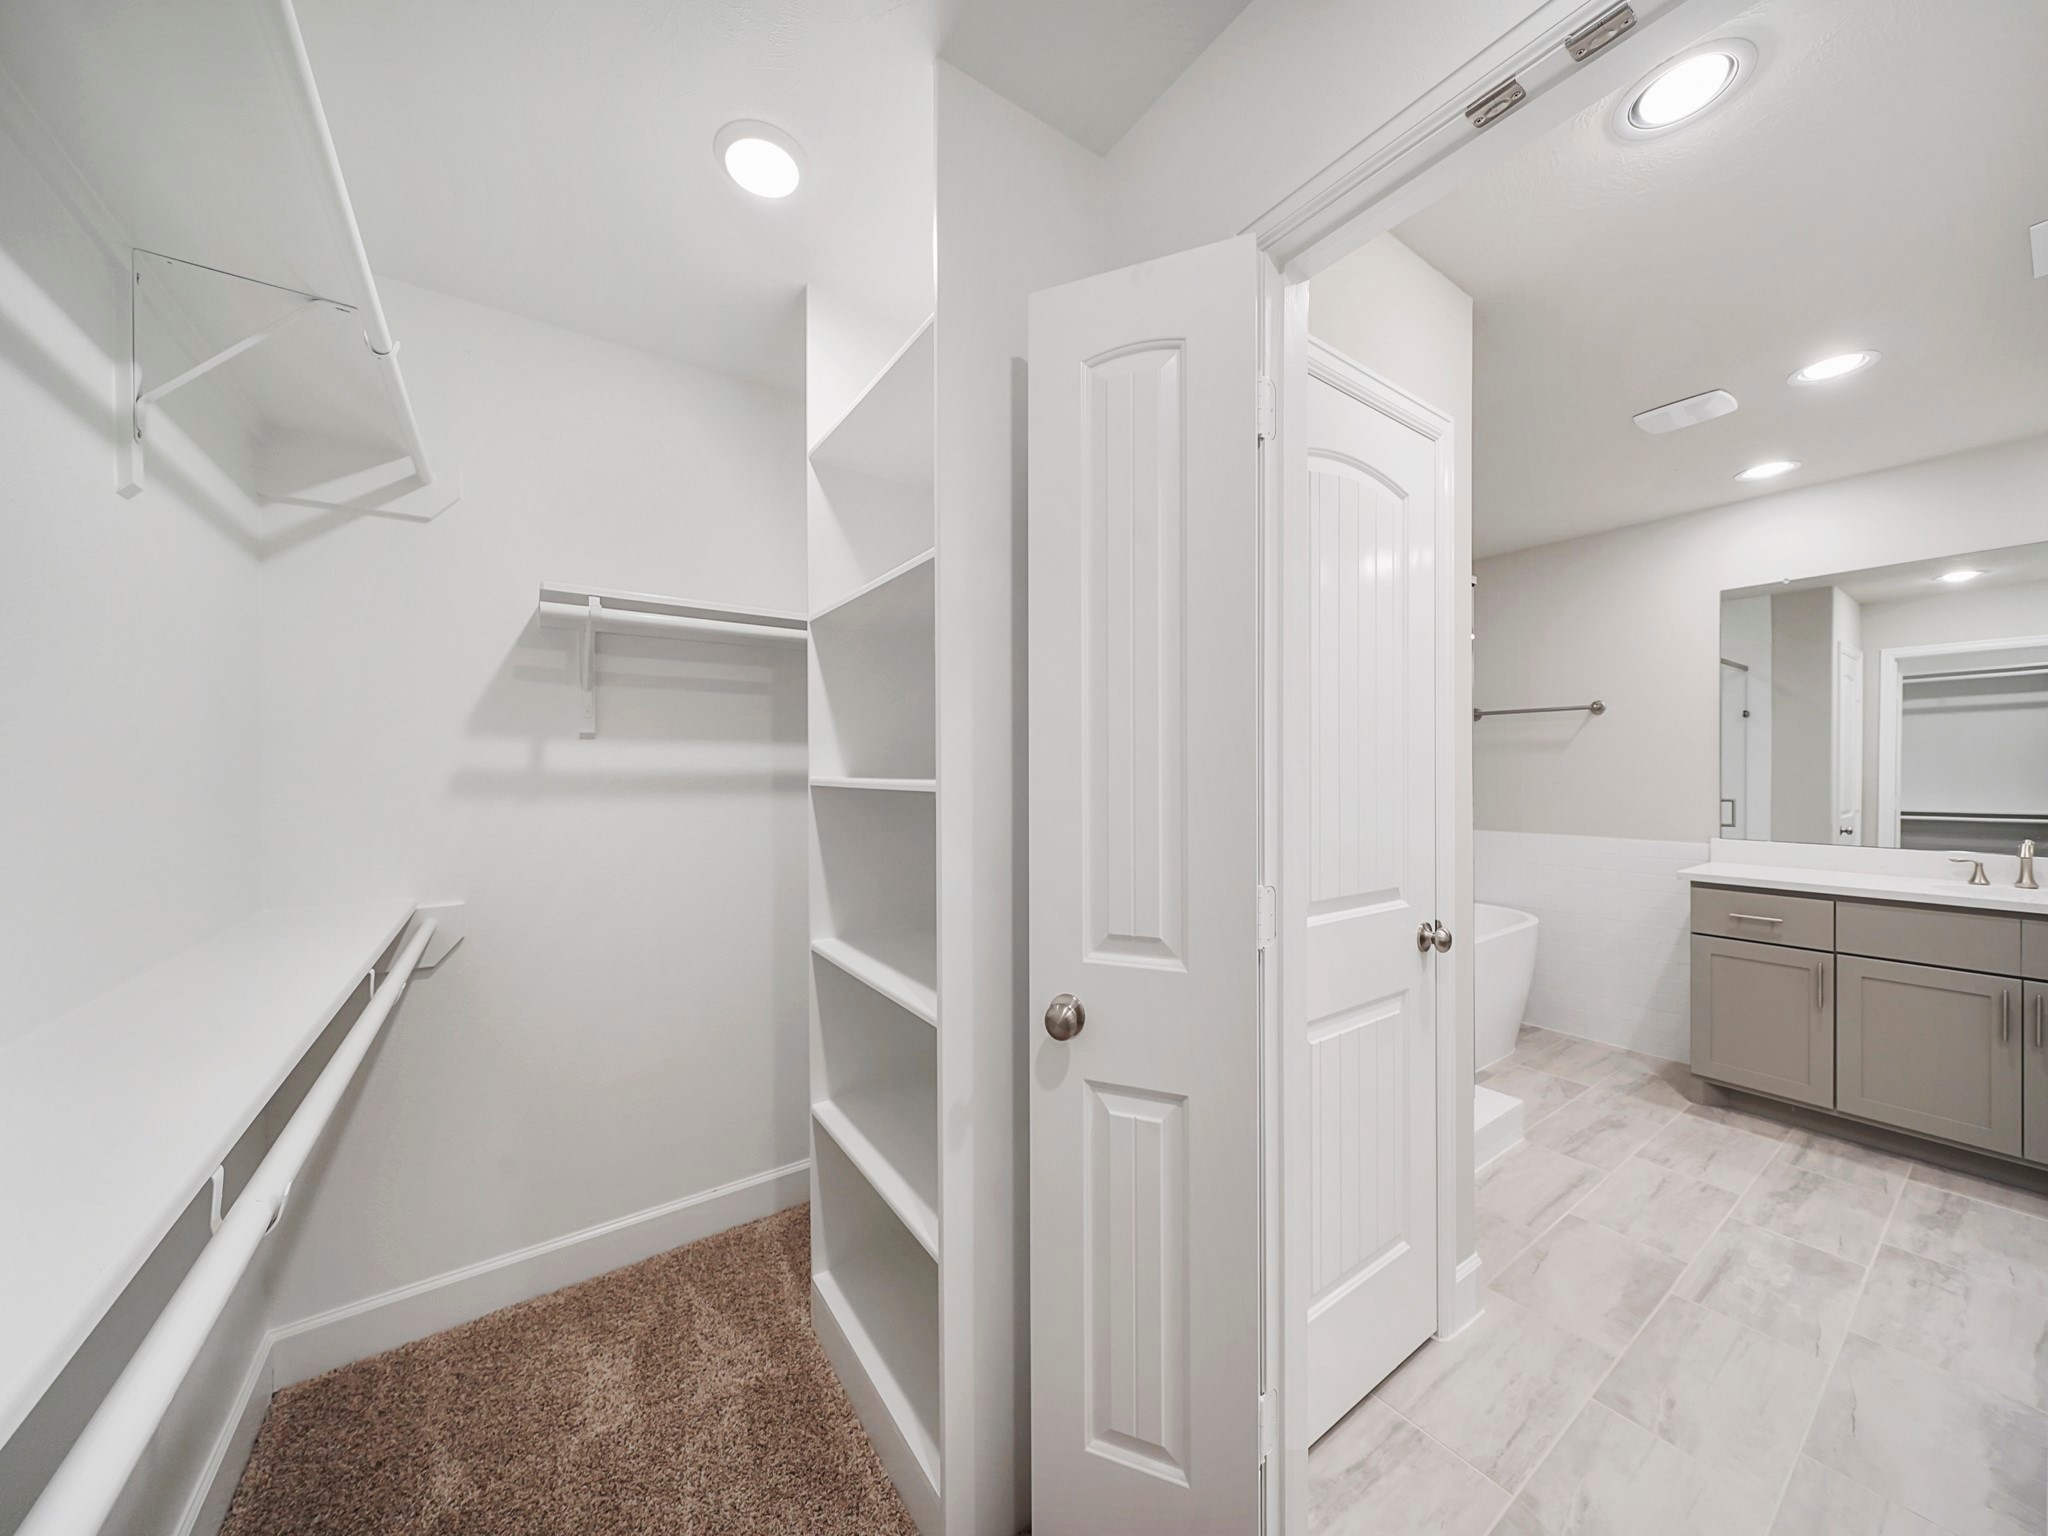 The Primary Bedroom Closet is spacious and features built-in shelves for additional storage. (Sample photos of a completed Bordeaux floor plan. The image may feature alternative selections and/or upgrades.)